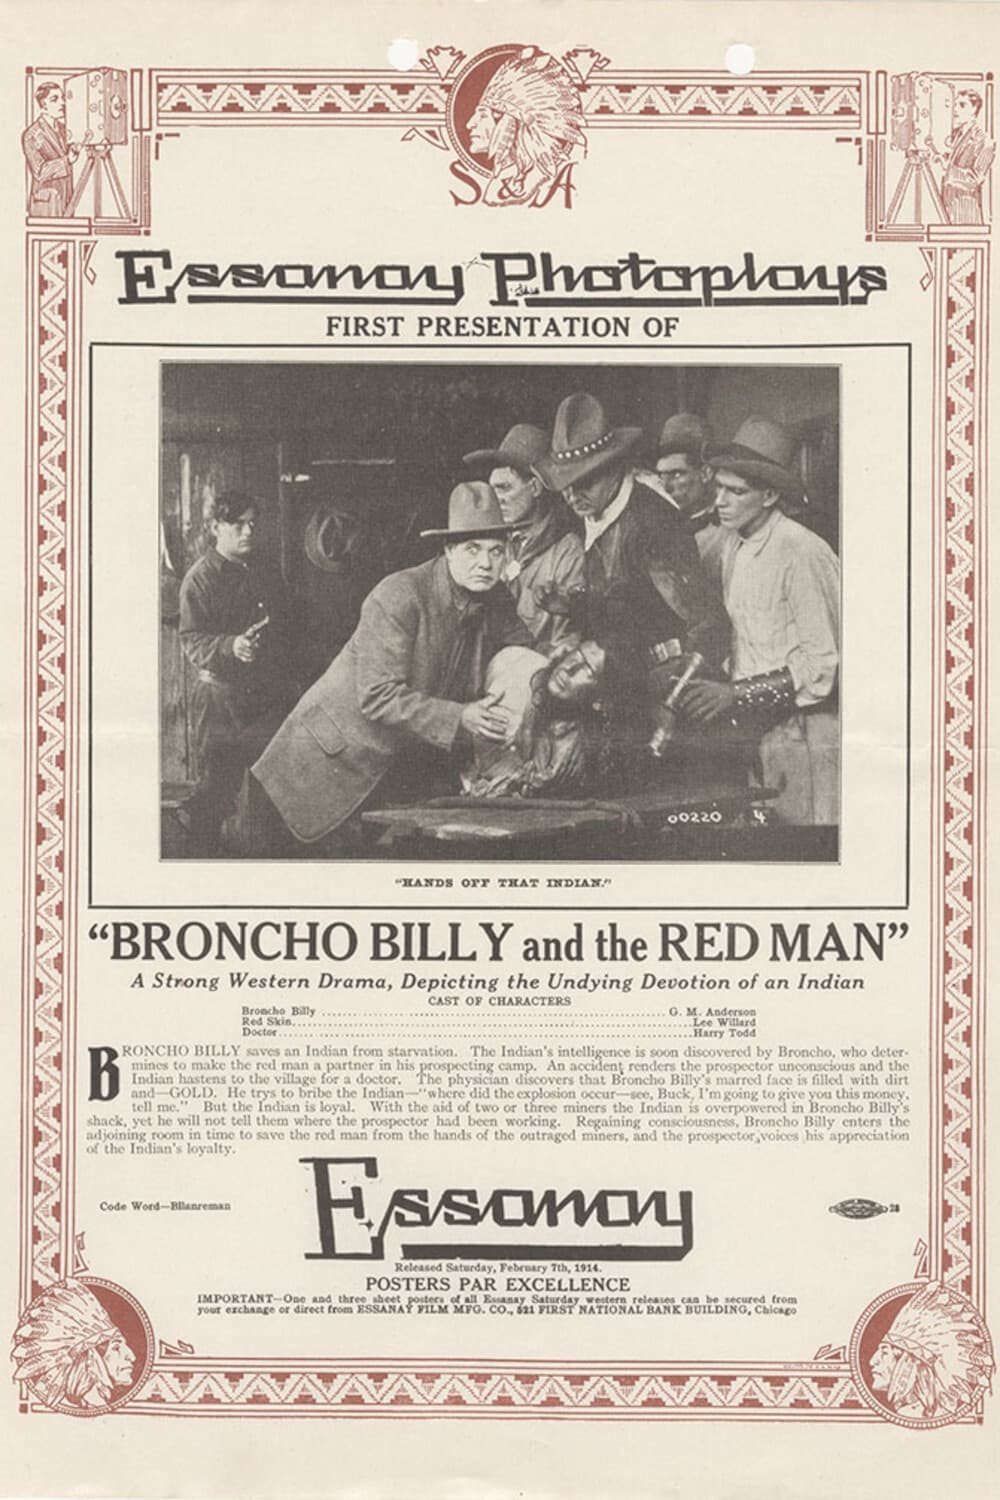 Broncho Billy and the Red Man